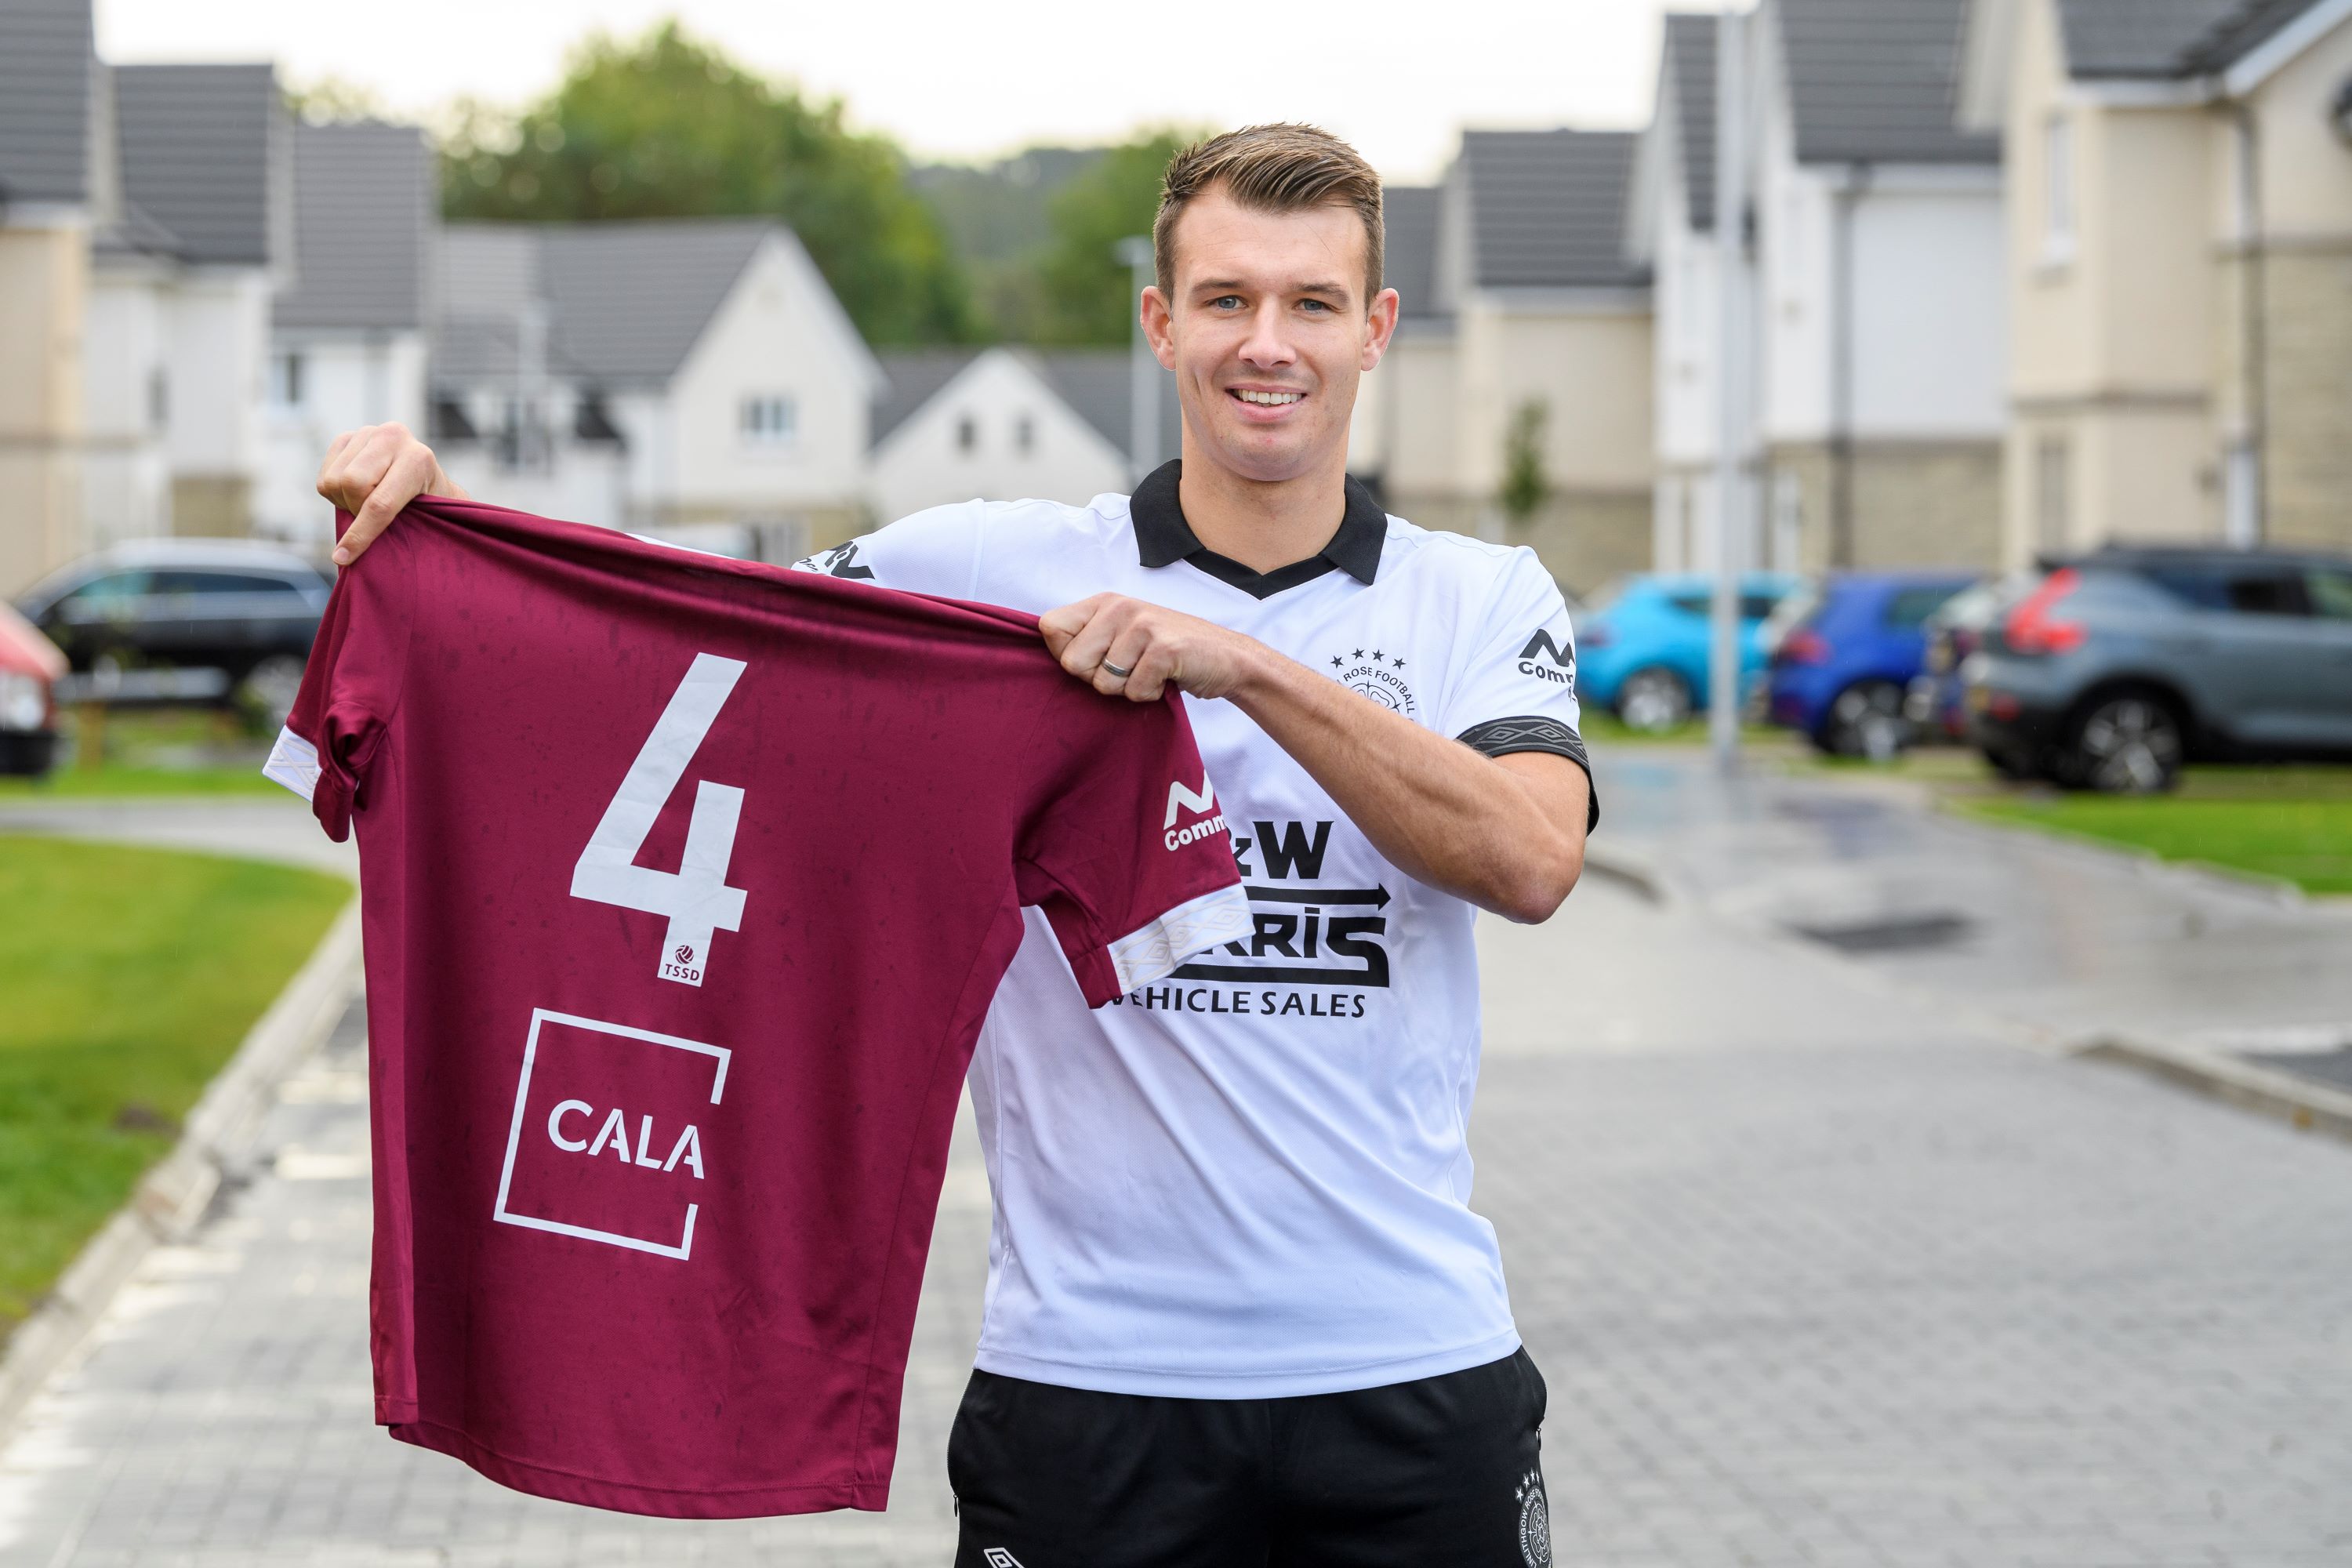 Cala sponsors Linlithgow Rose ahead of fourth local project